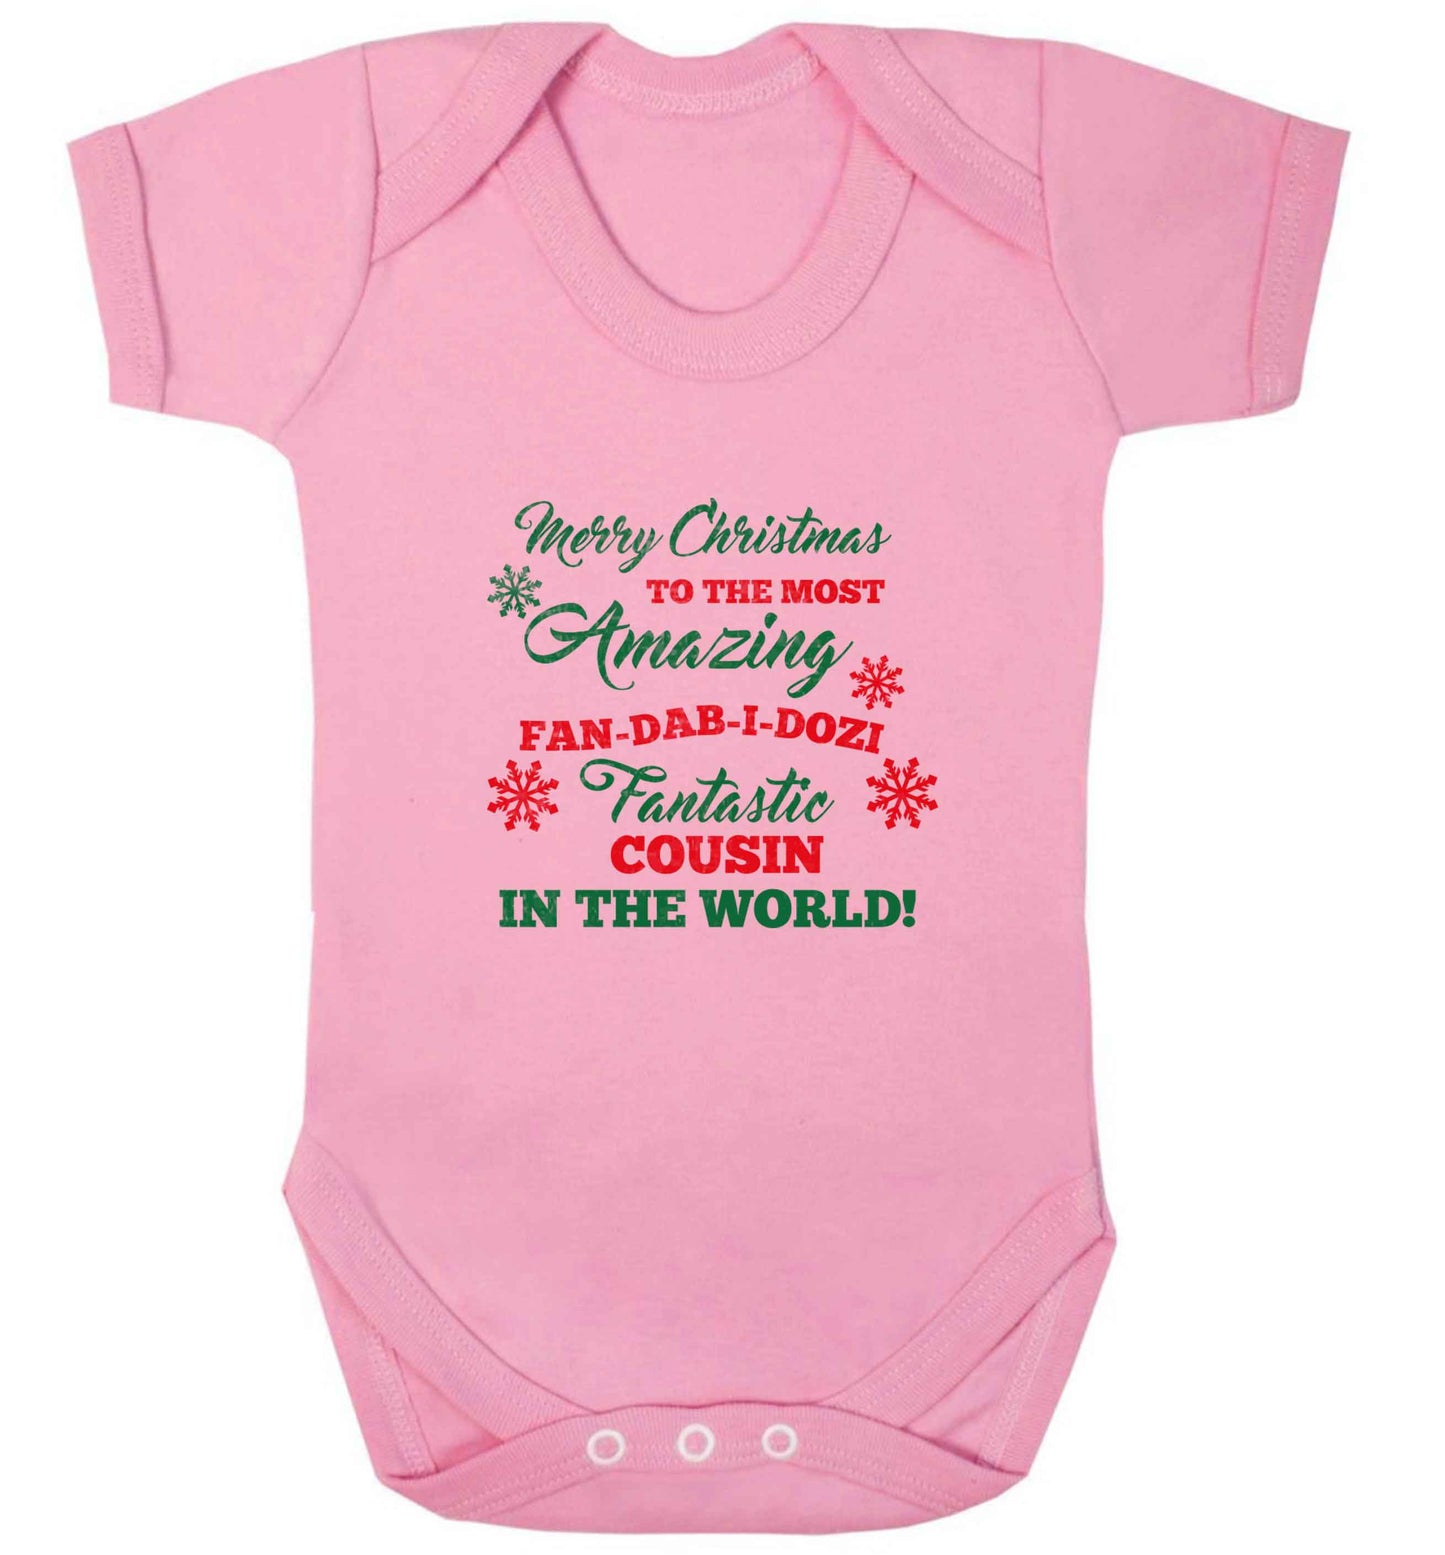 Merry Christmas to the most amazing fan-dab-i-dozi fantasic Cousin in the world baby vest pale pink 18-24 months